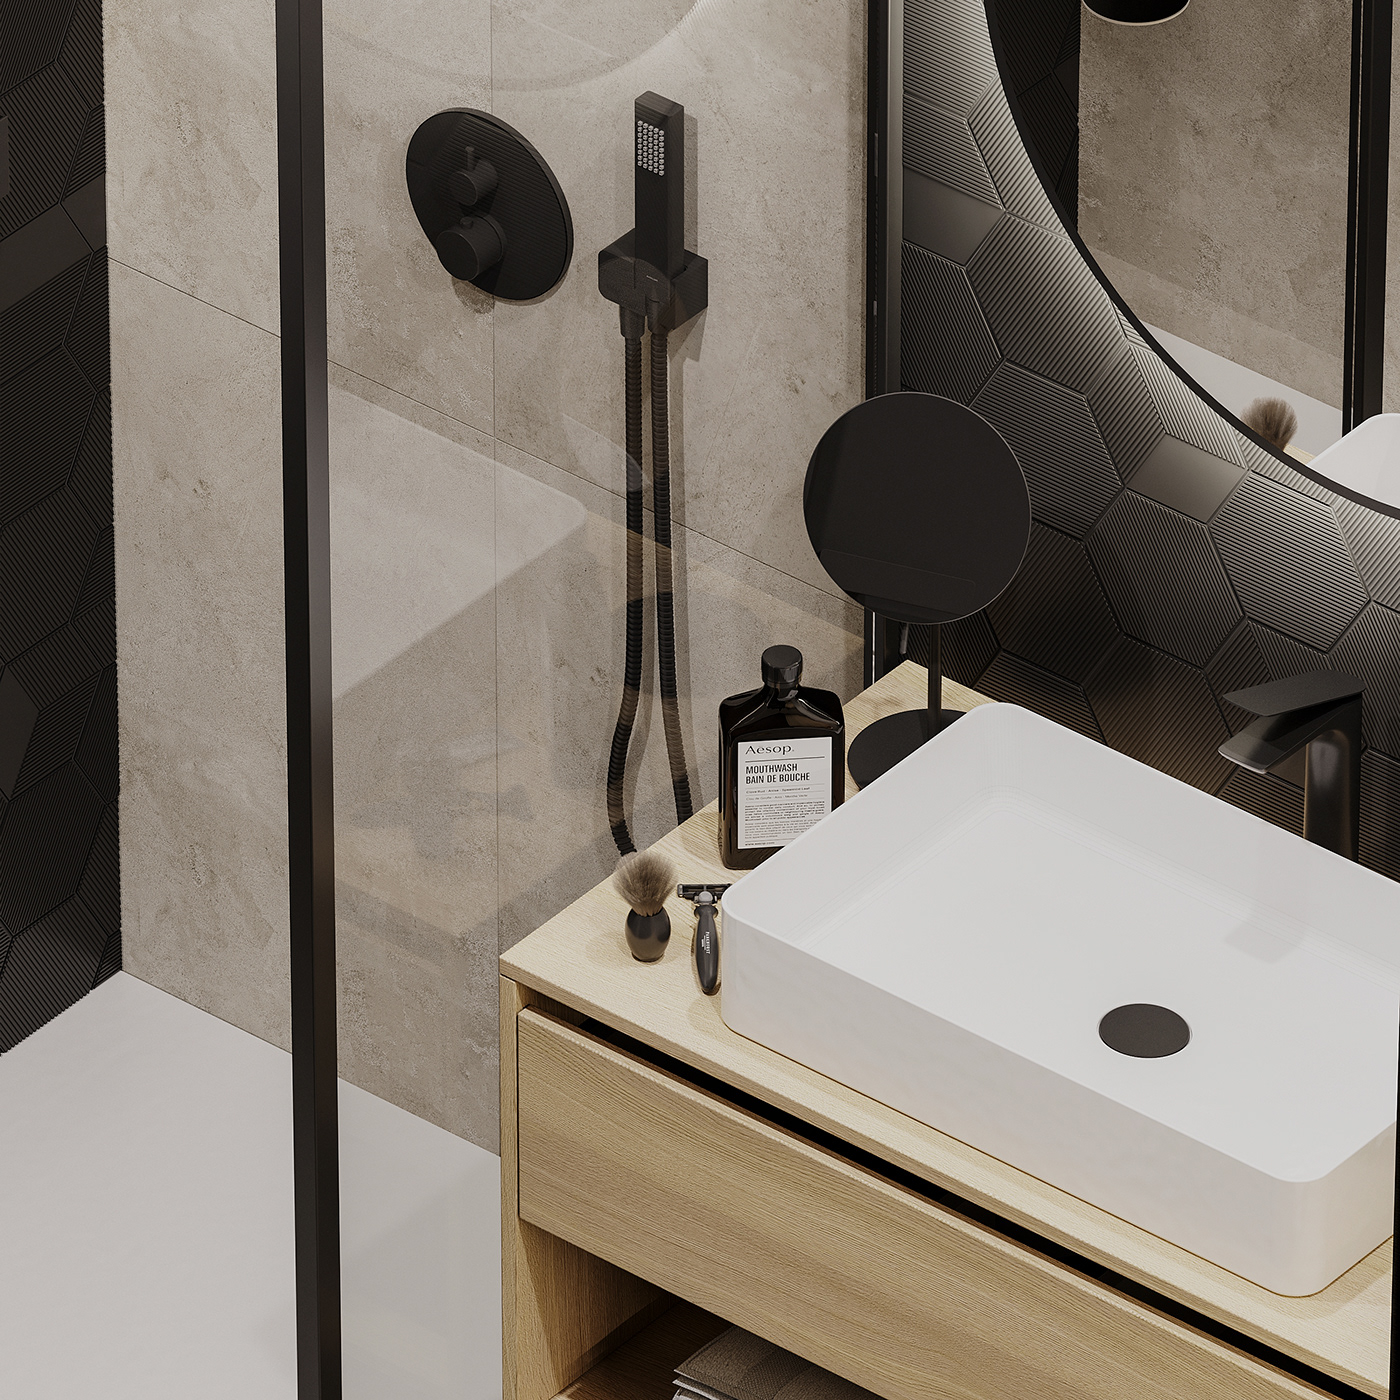 Matte black faucets in the sink, shower, and handles, as well as a small mirror, are an excellent choice for this space. Bathroom interiors benefit from anti-slip materials and glamorous colors.